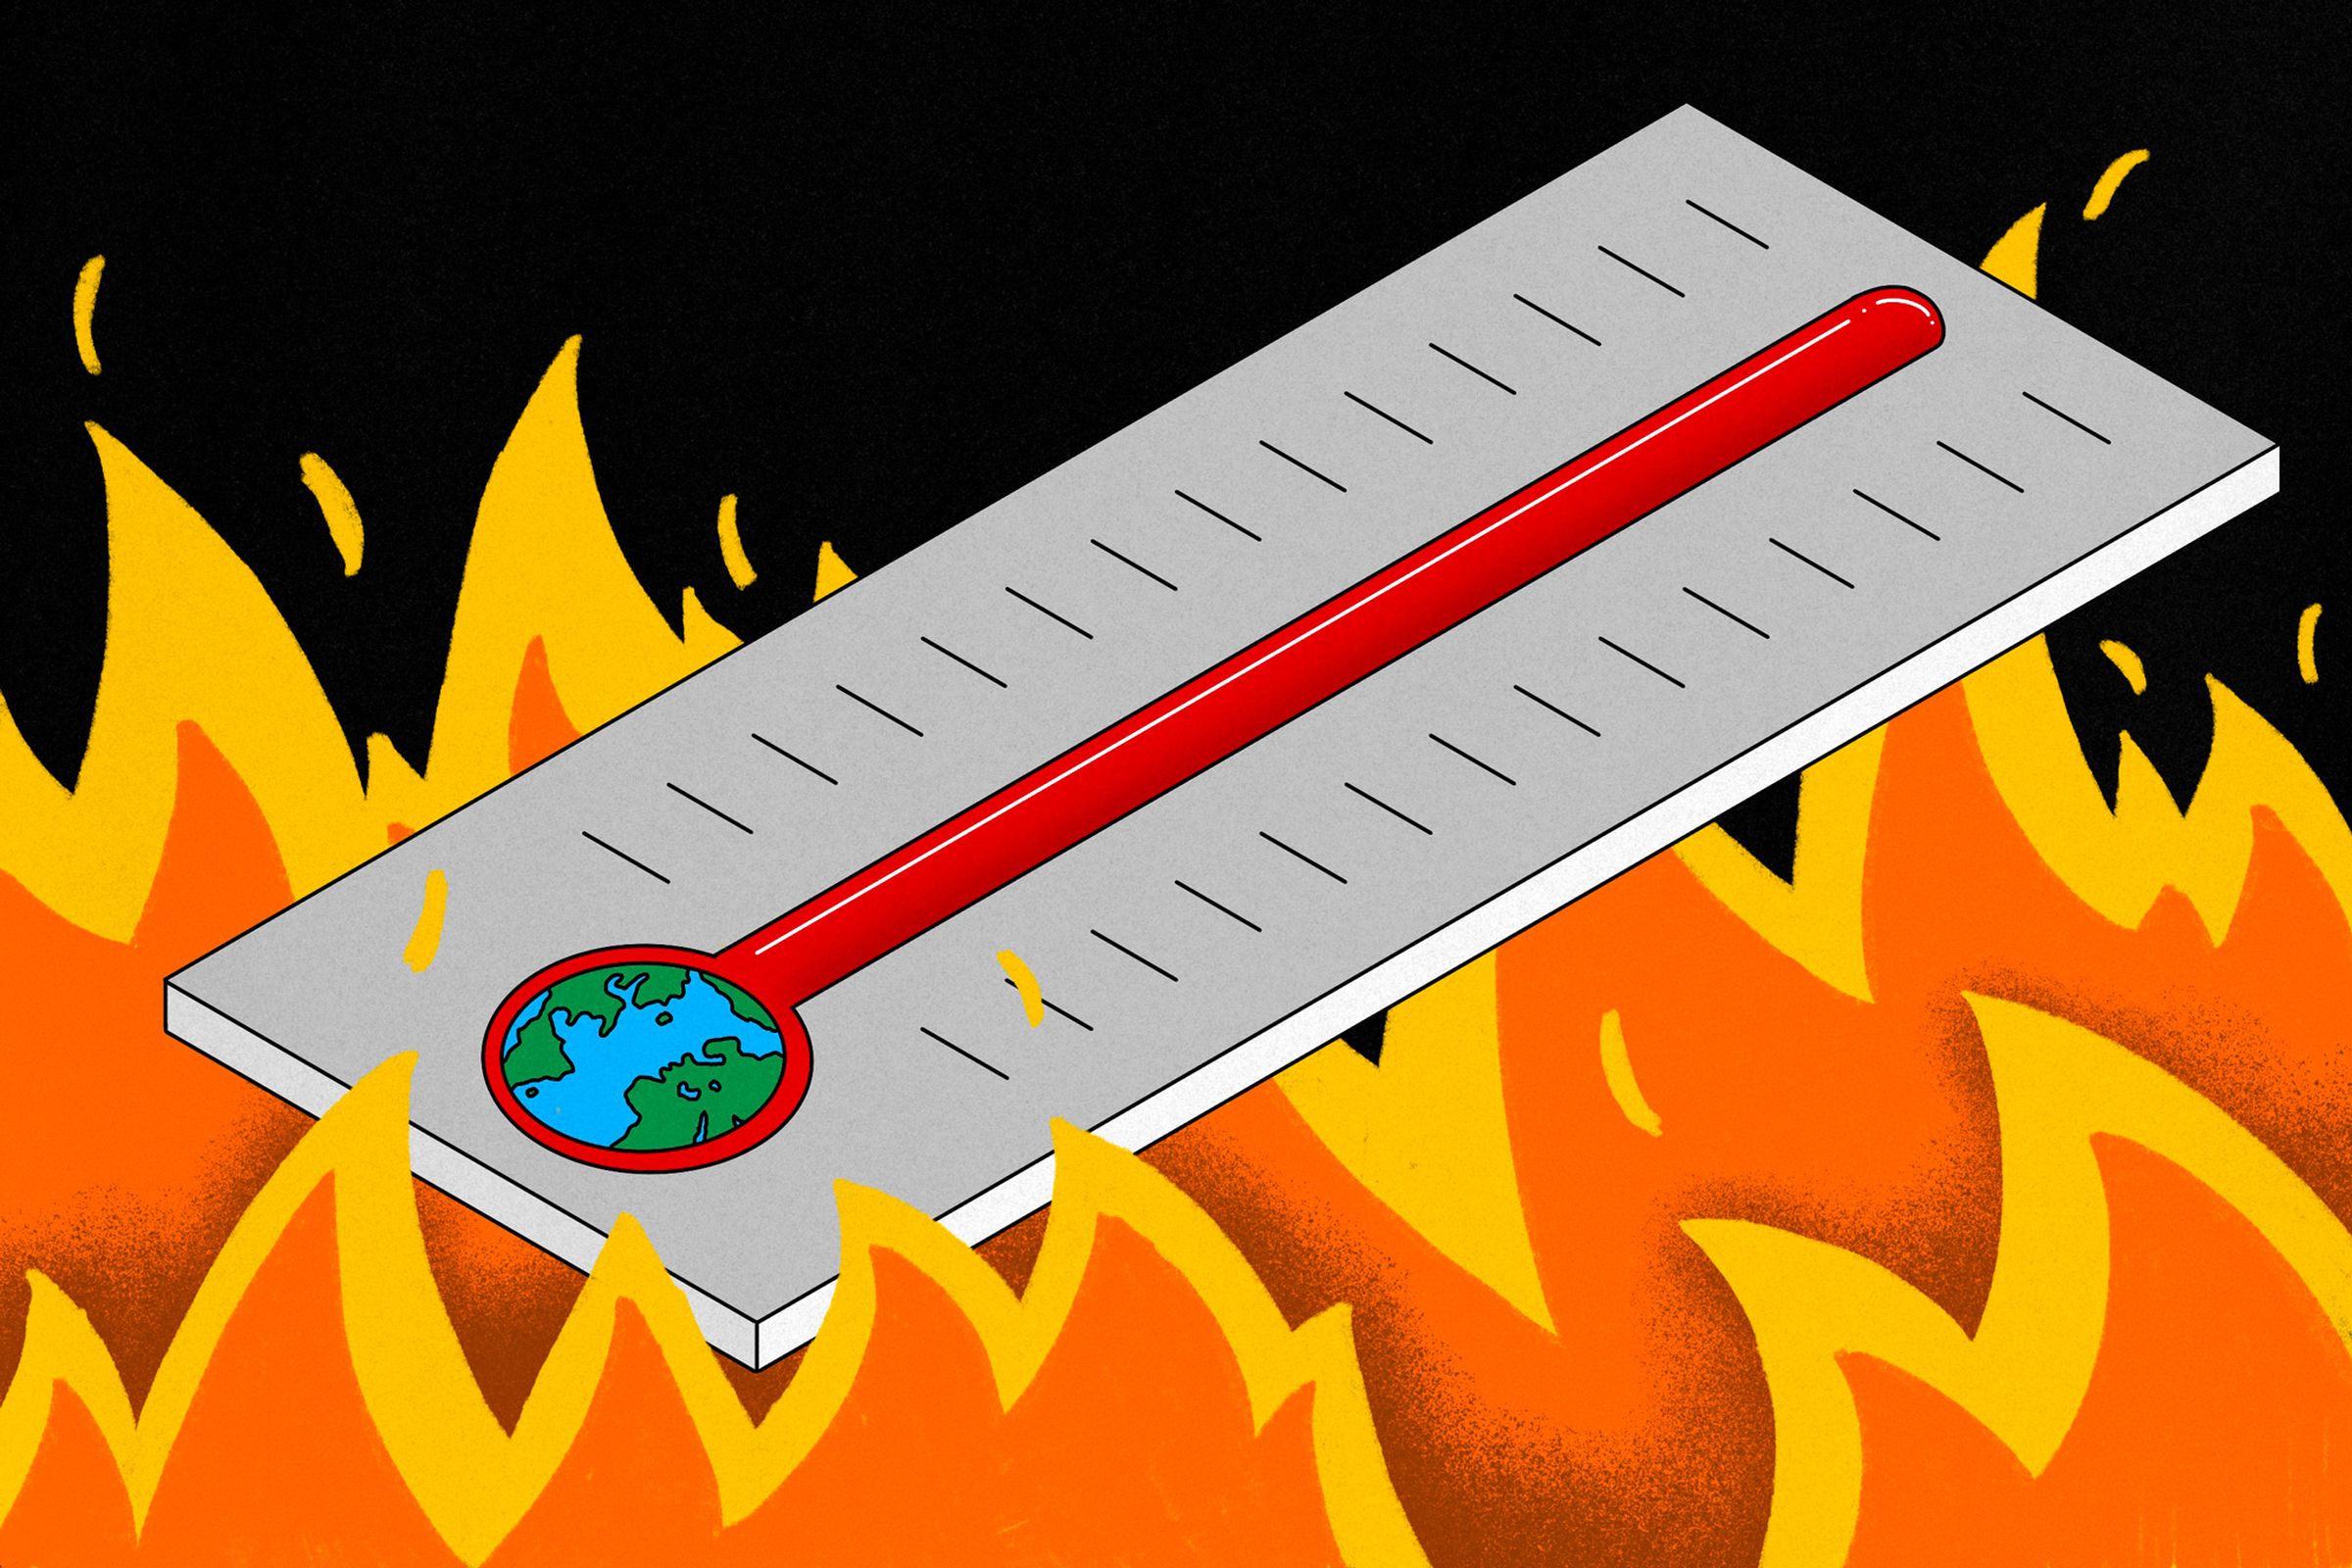 Art depicting a red thermometer above flames